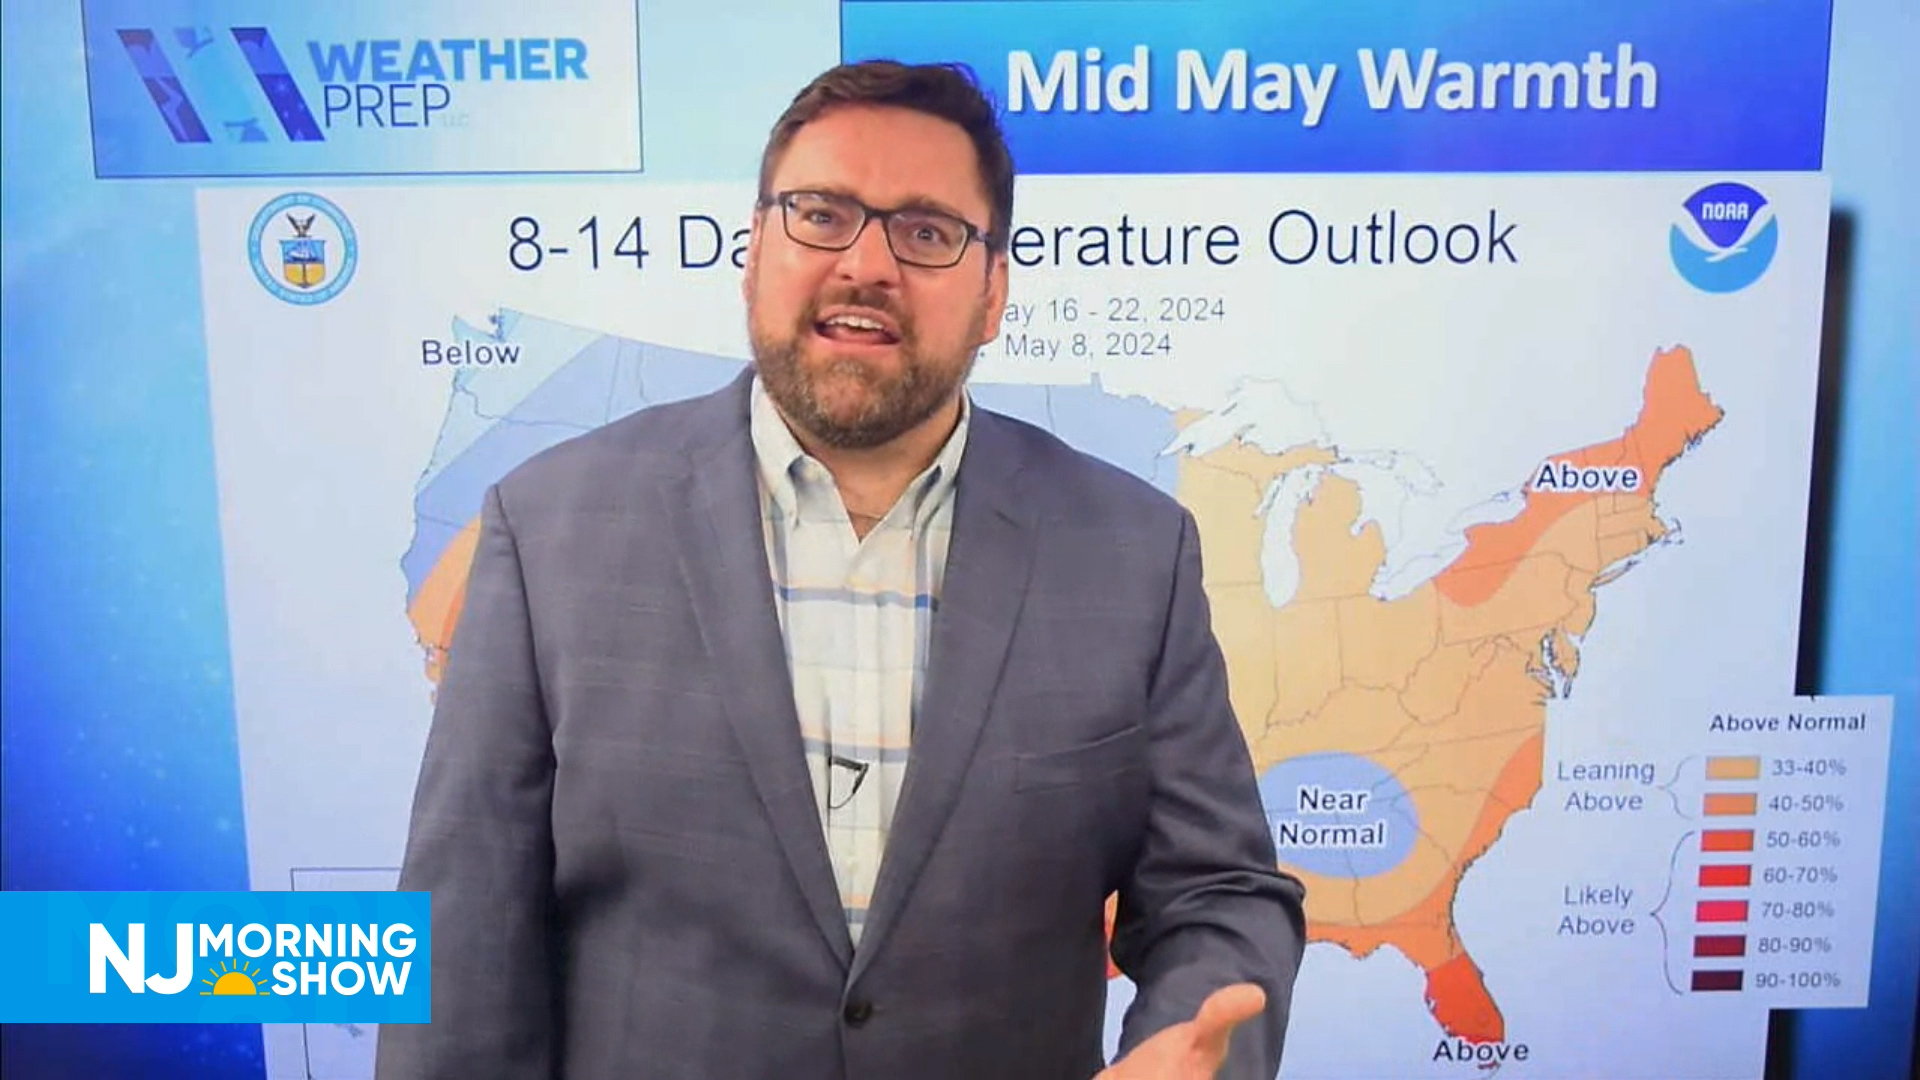 NJ Morning Show – Extended May Outlook